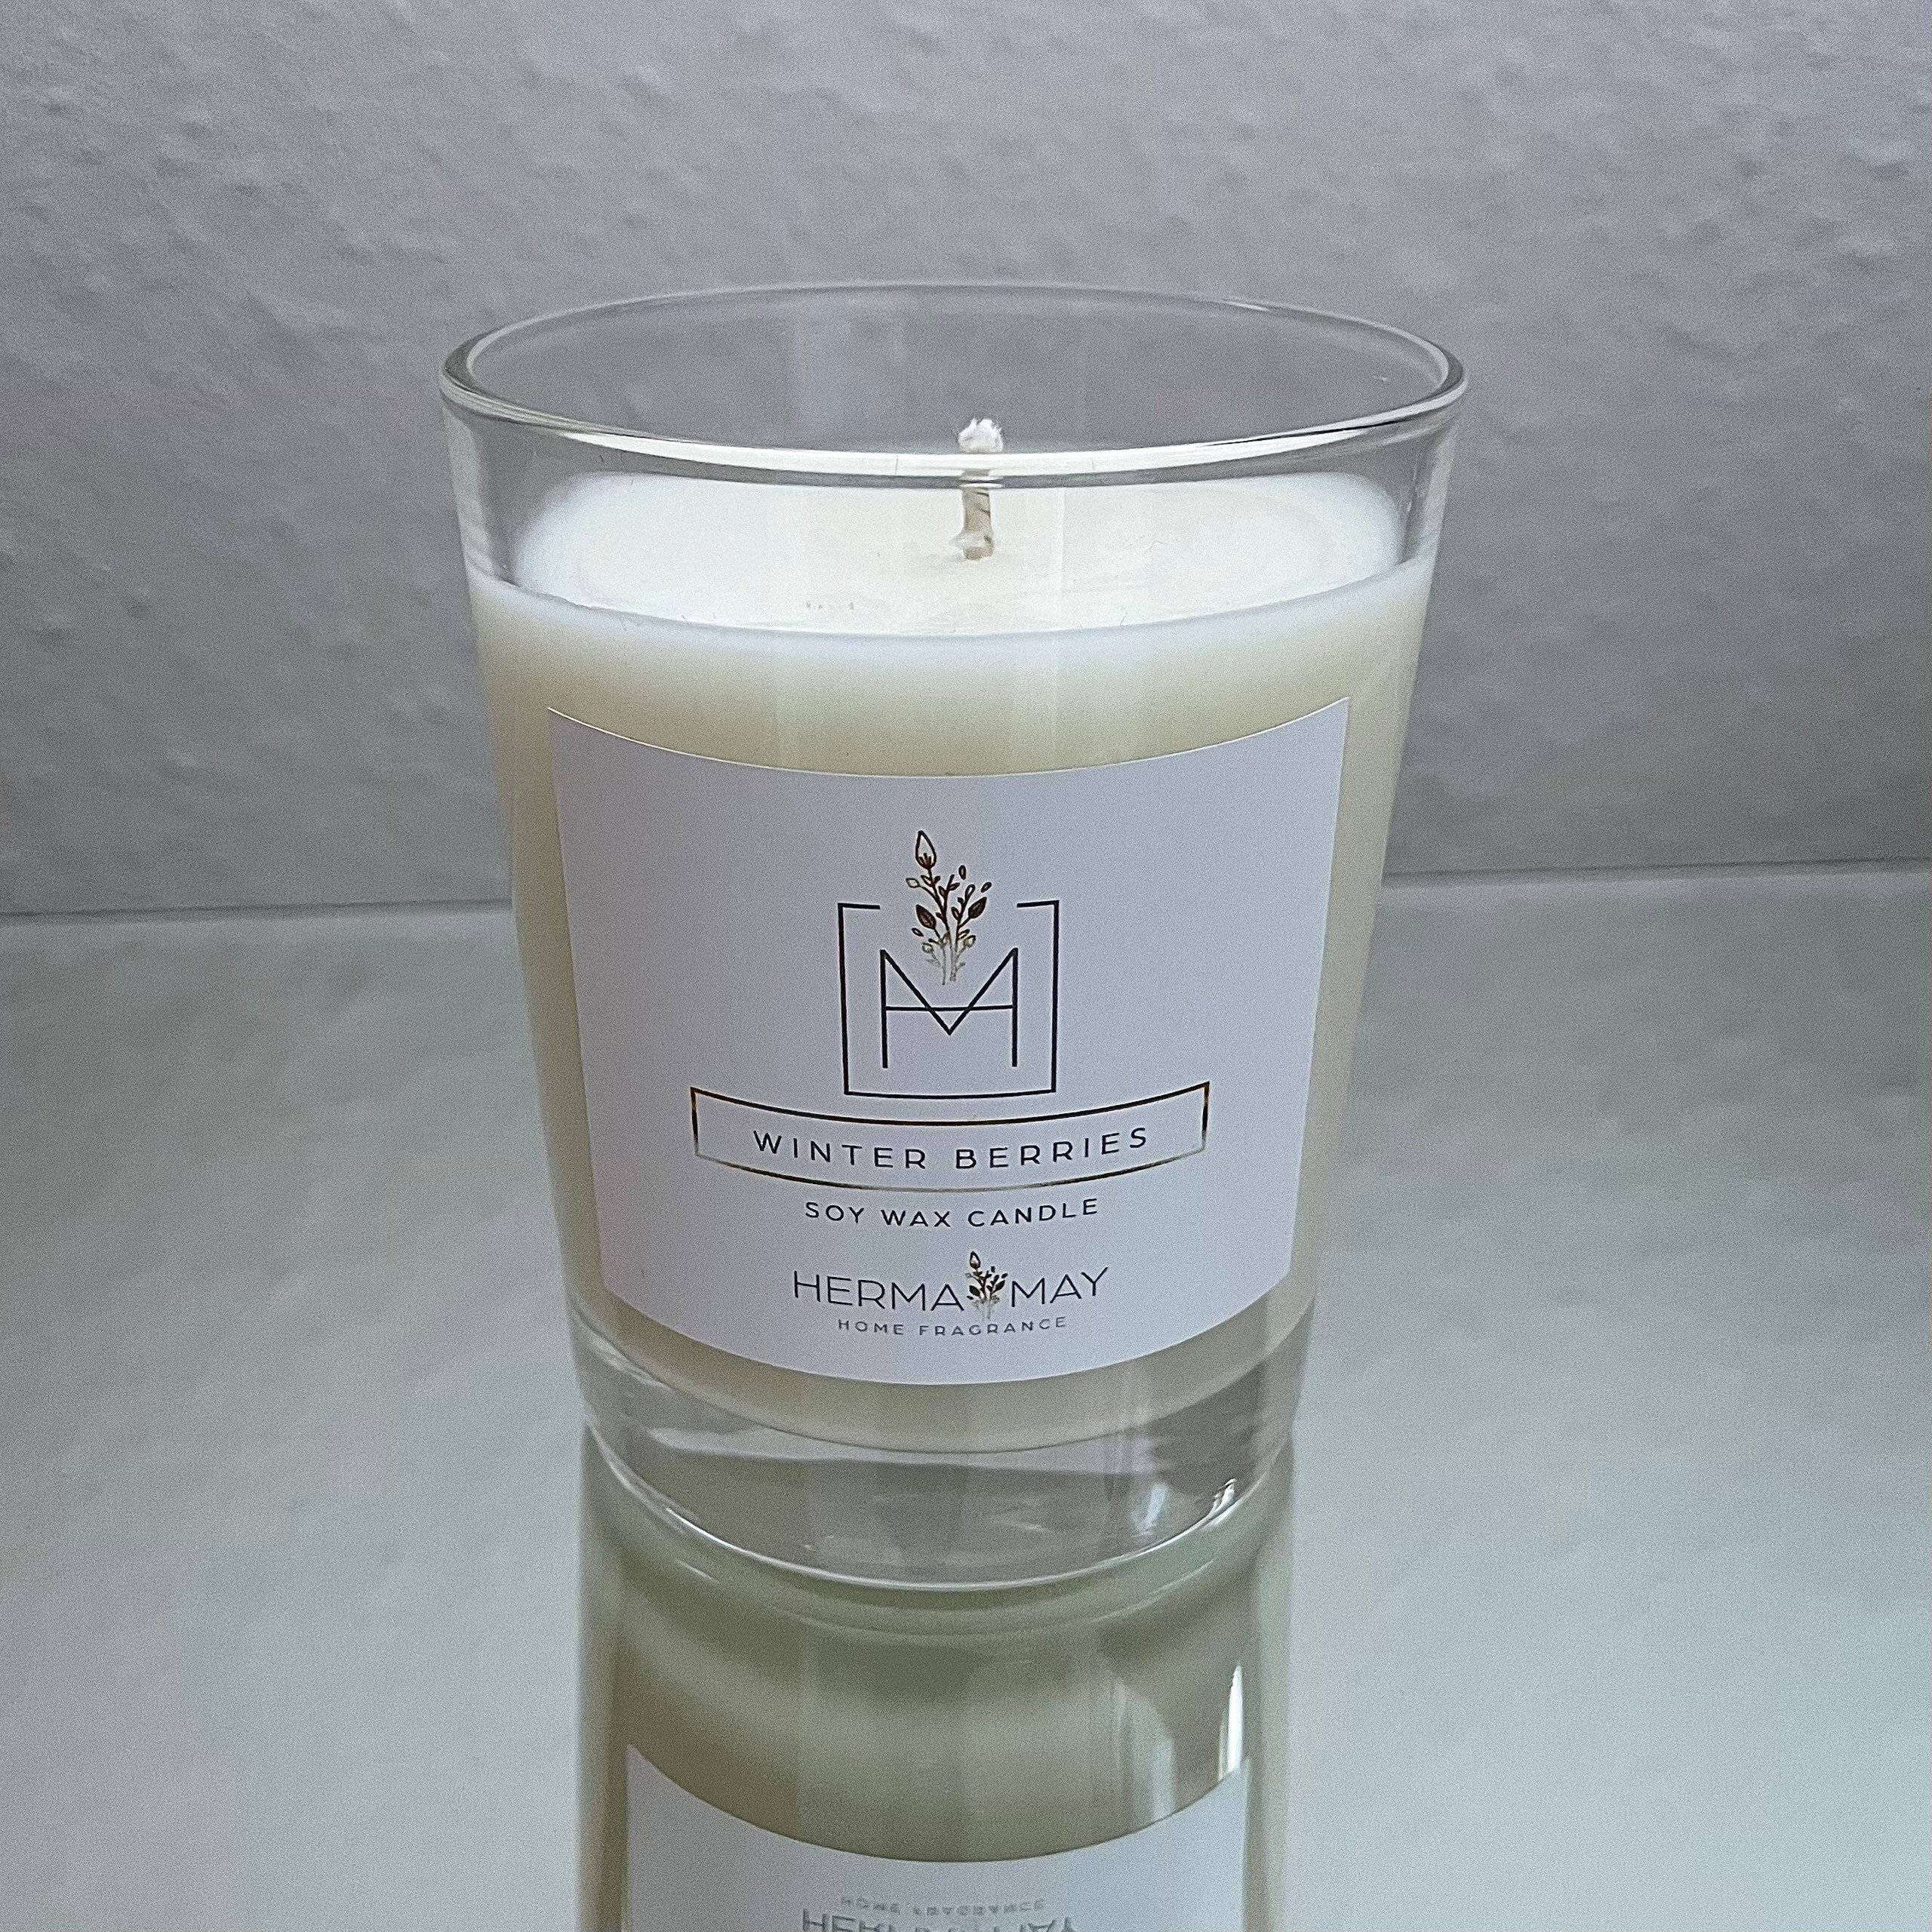 Winter Berries Soy Wax Candle